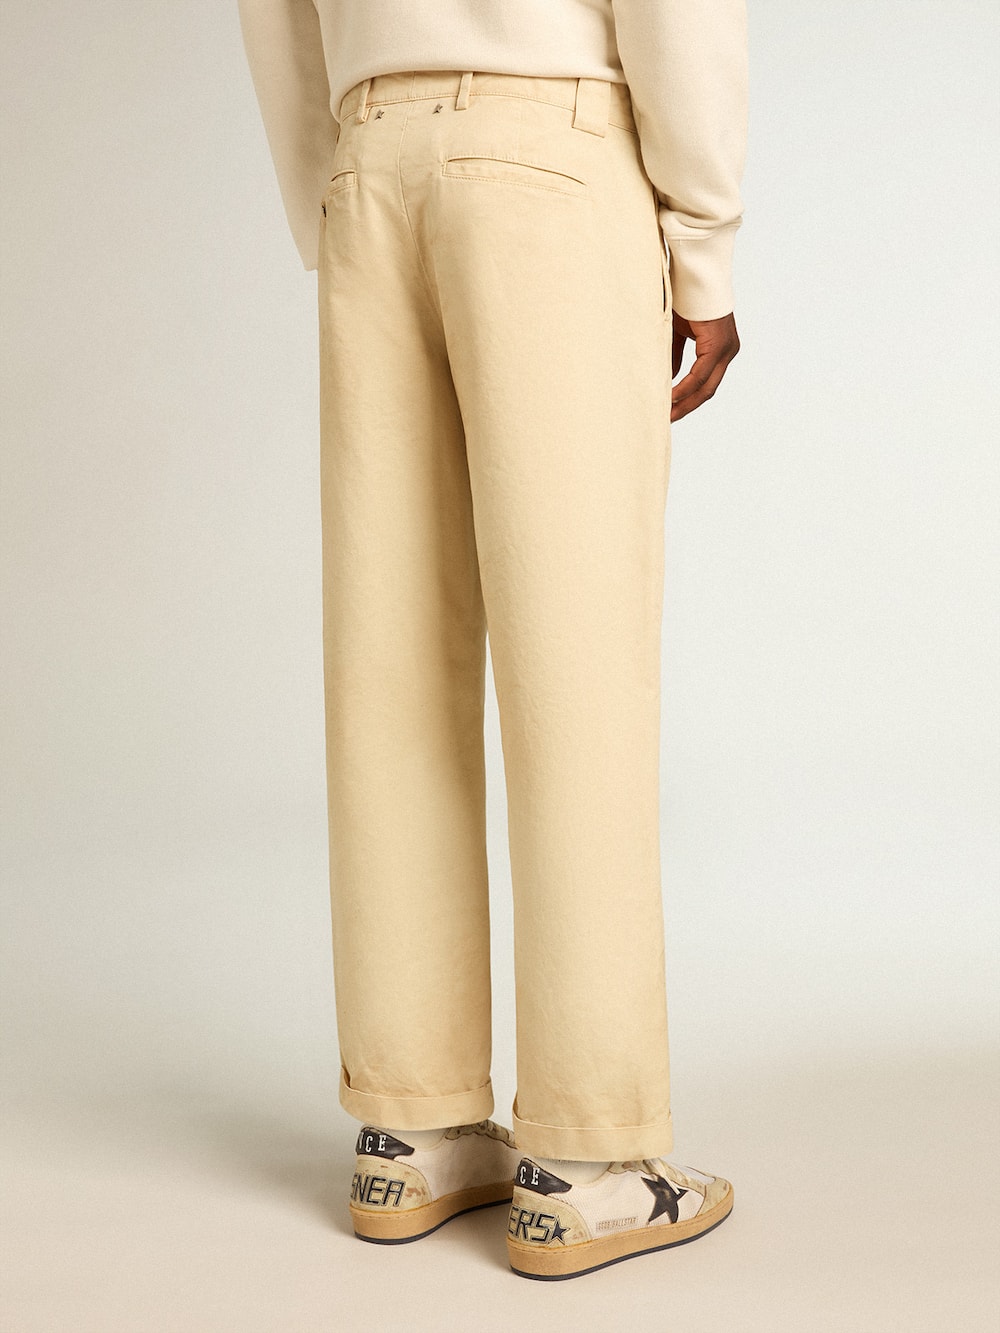 Golden Goose - Ecru-colored cotton chinos in 